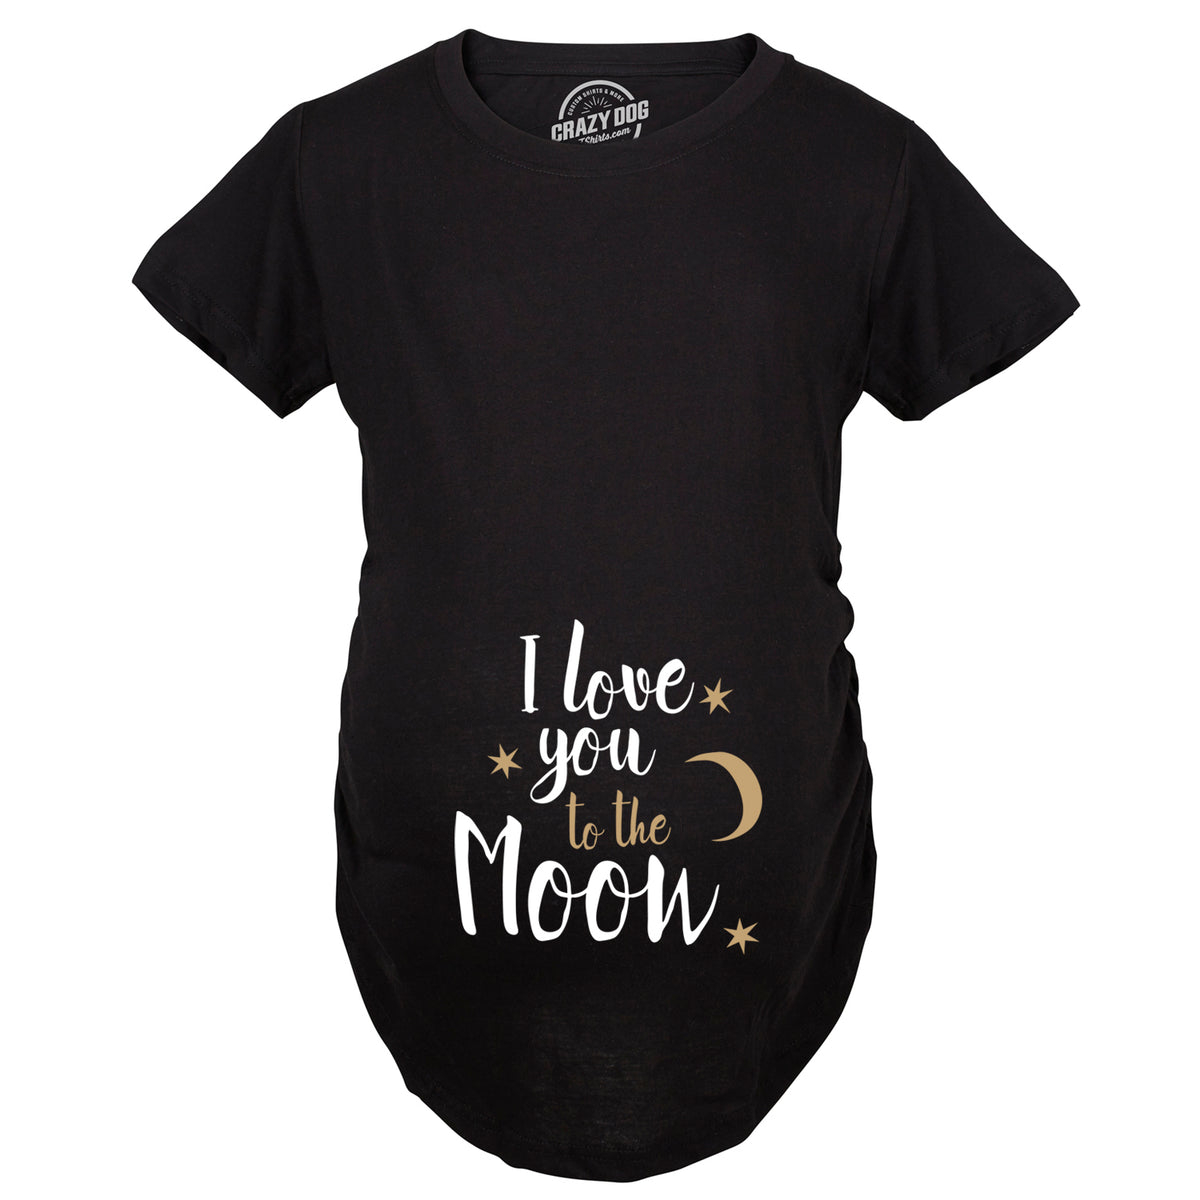 I Love You To The Moon Maternity T Shirt